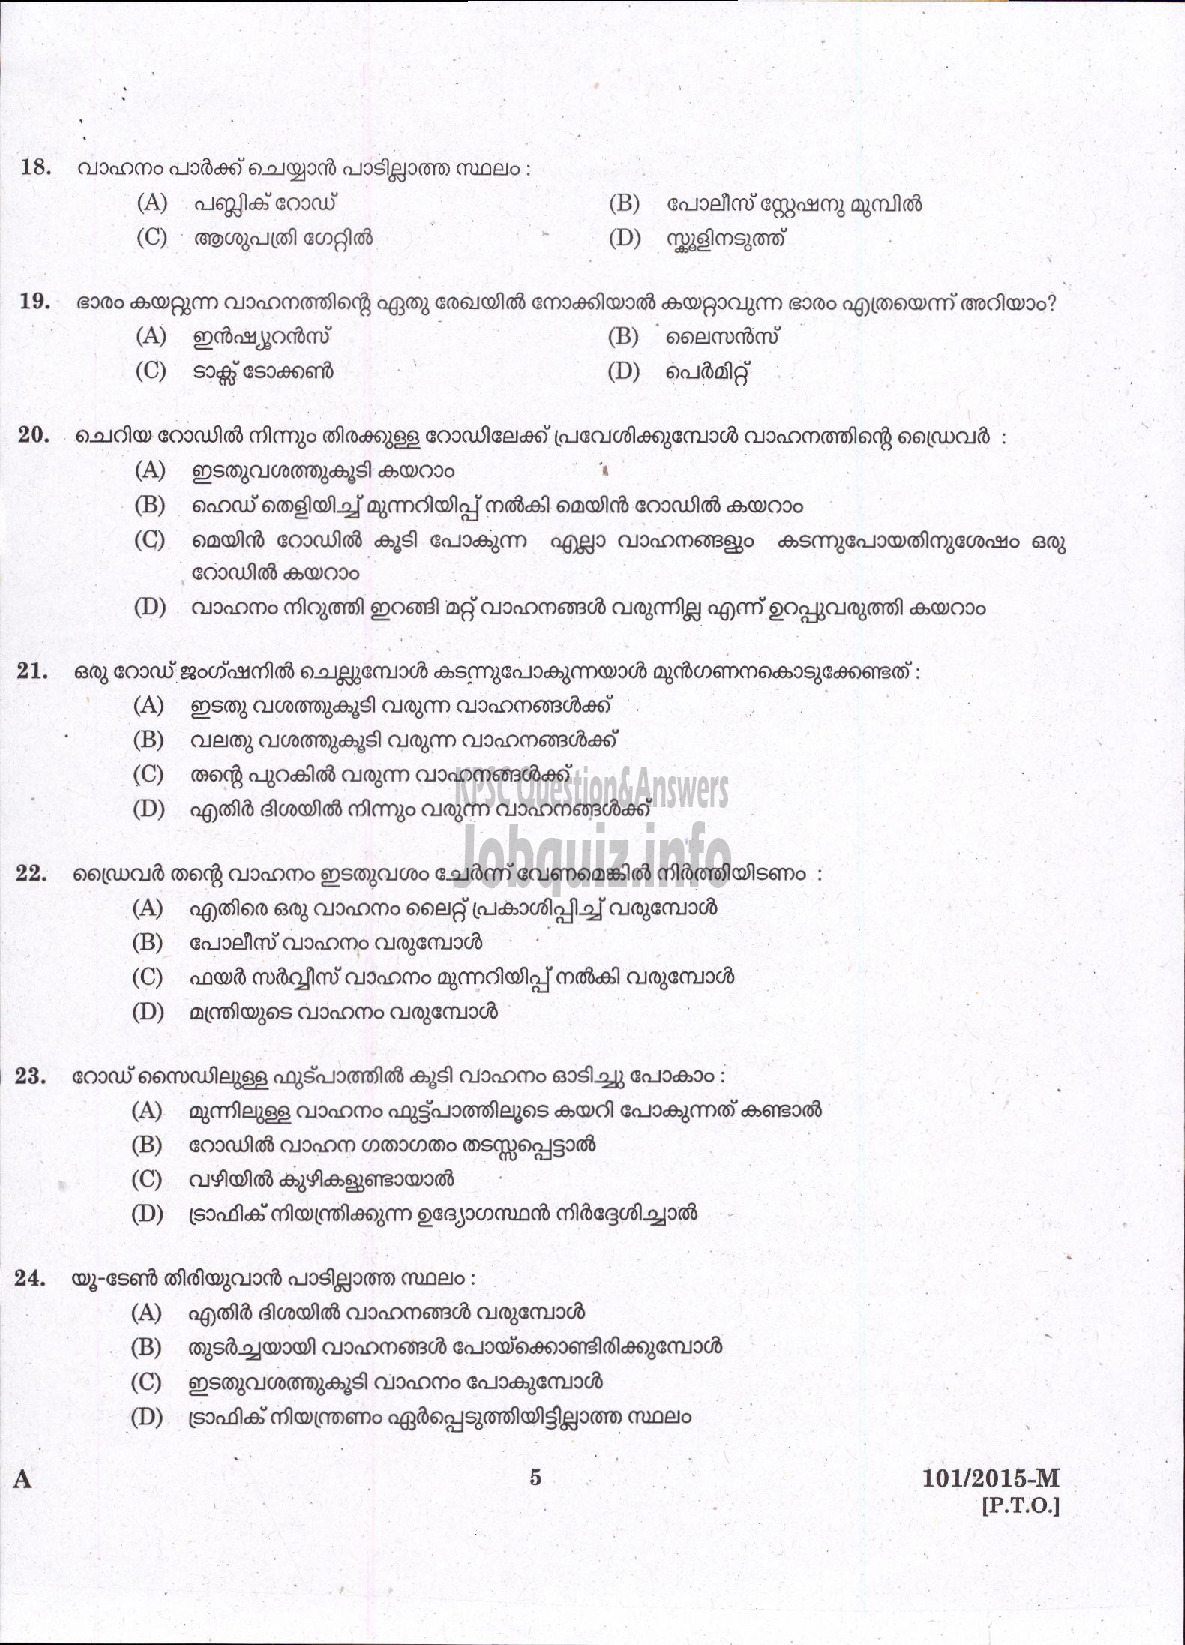 Kerala PSC Question Paper - FIREMAN DRIVER CUM PUMP OPERATOR TRAINEE FIRE AND RESCUE SERVICES ( Malayalam ) -3